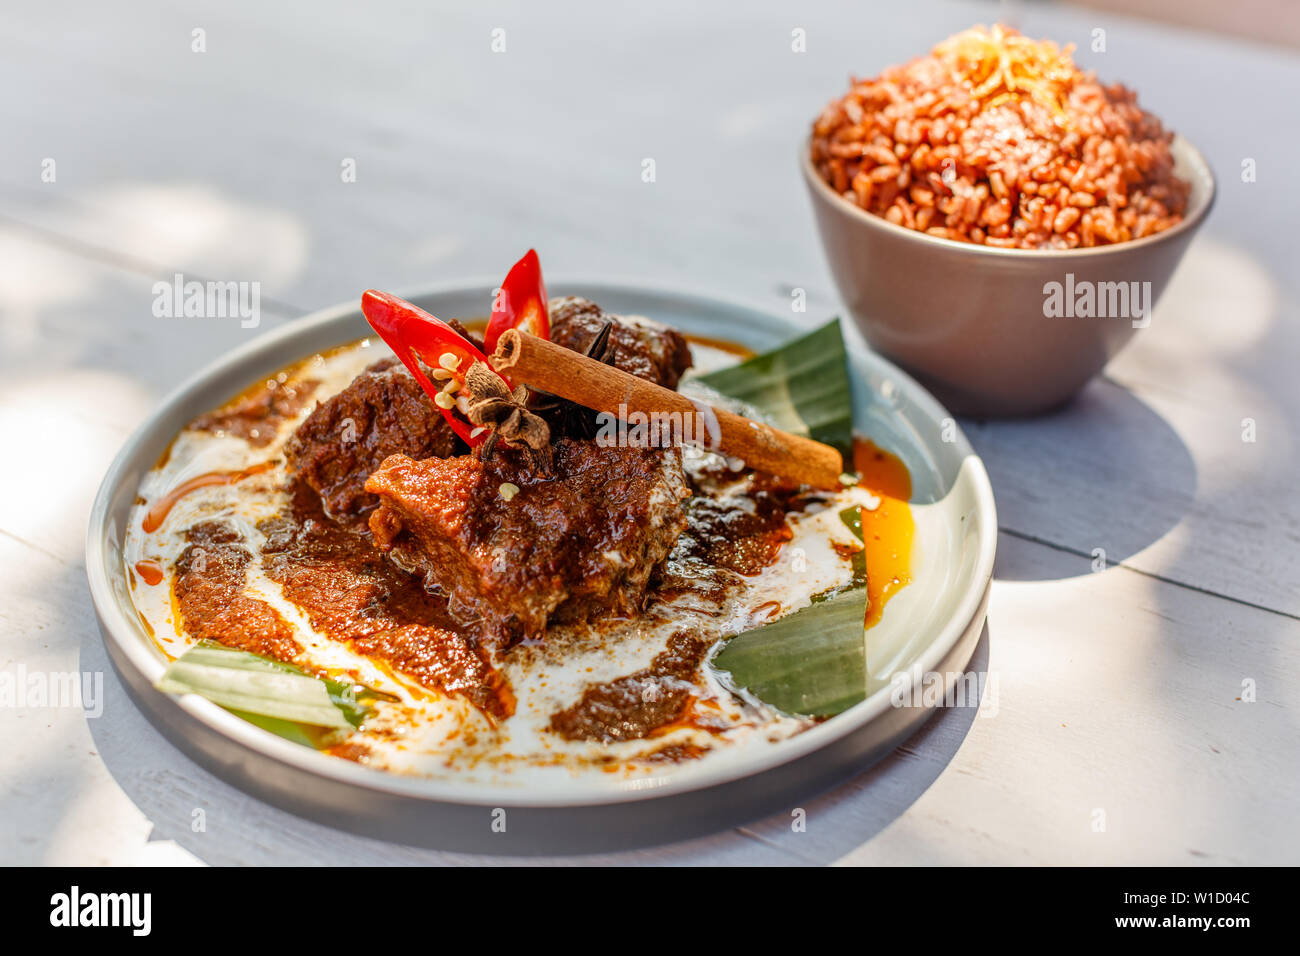 Beef Rendang on a plate with banana leaf, decorated with red chili and cinnamon stick. Served with nasi merah, steamed red rice. Indonesian cuisine. Stock Photo